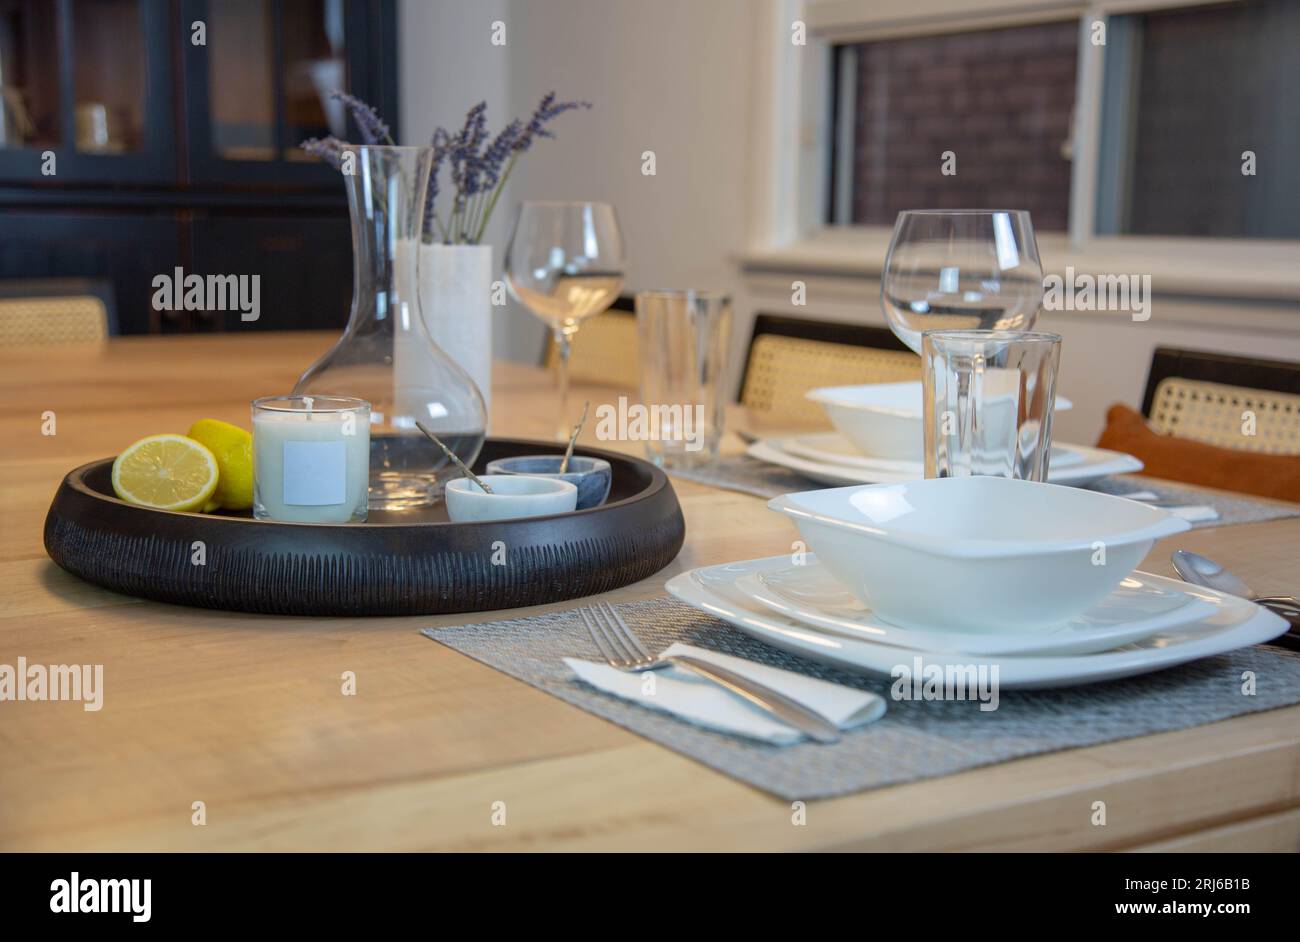 A dining table is set with dinnerware for a meal Stock Photo